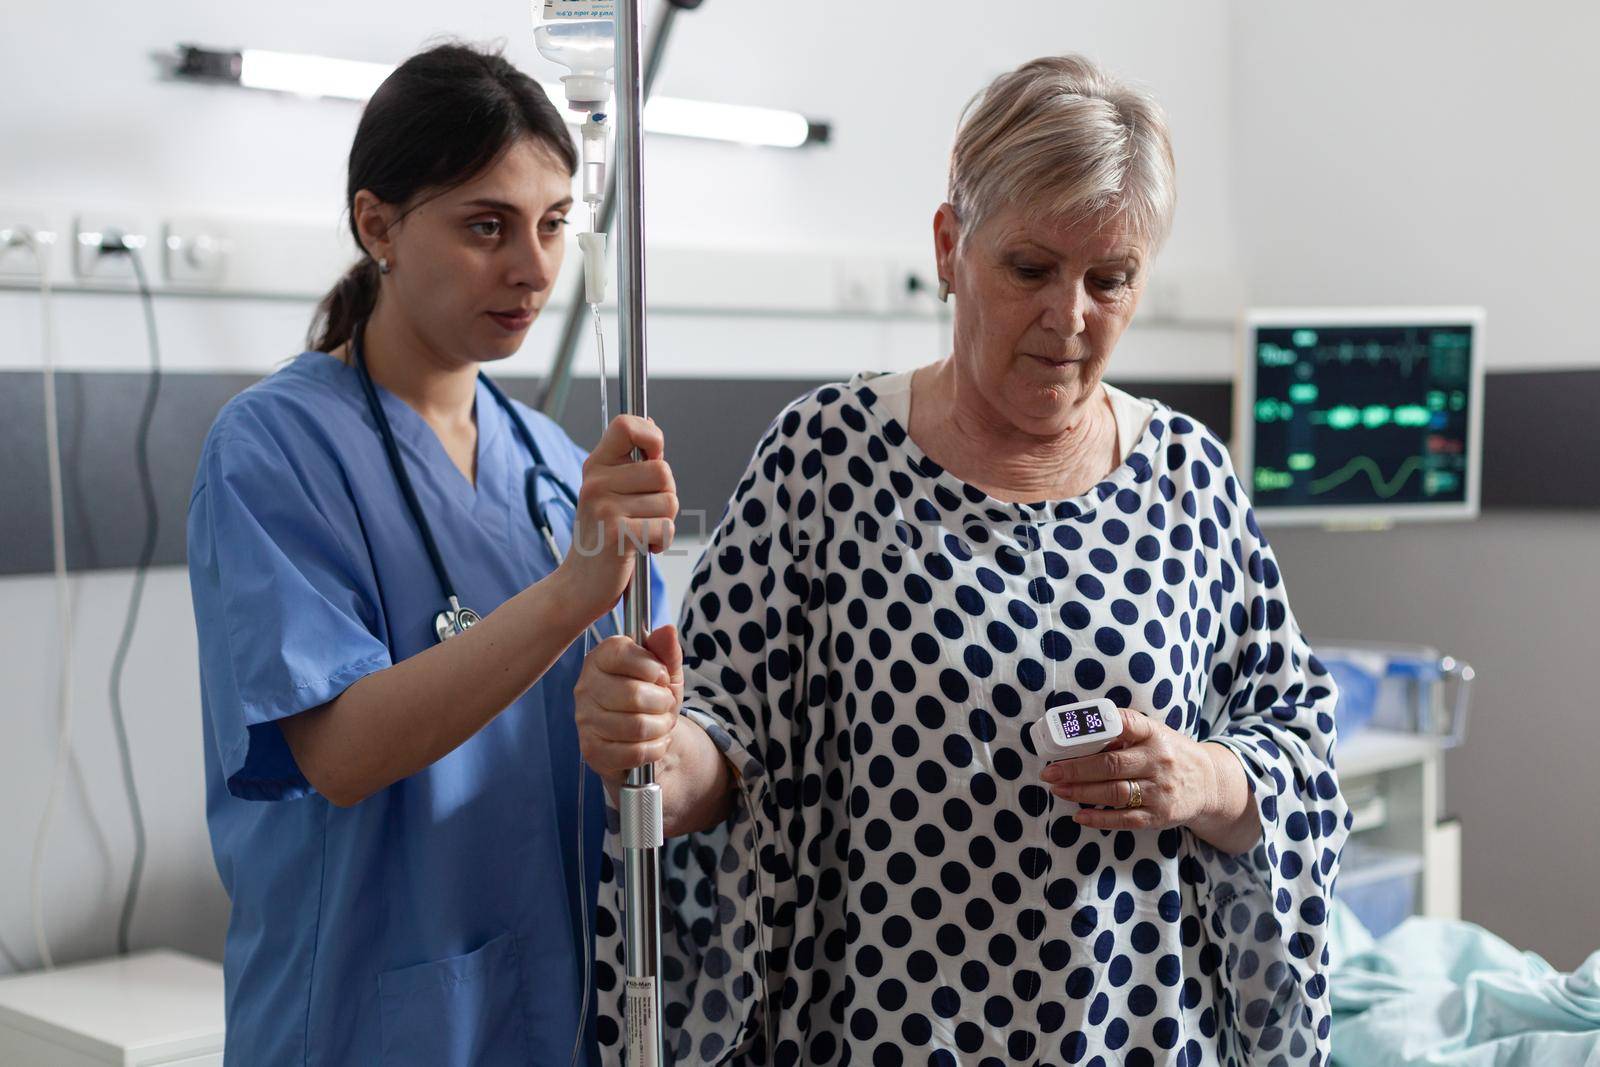 Mature old sick woman getting intravenous medicine from iv drip bag. Medical nurse helping patient walk through hospital room and showing support. Oxymeter attached on finger.